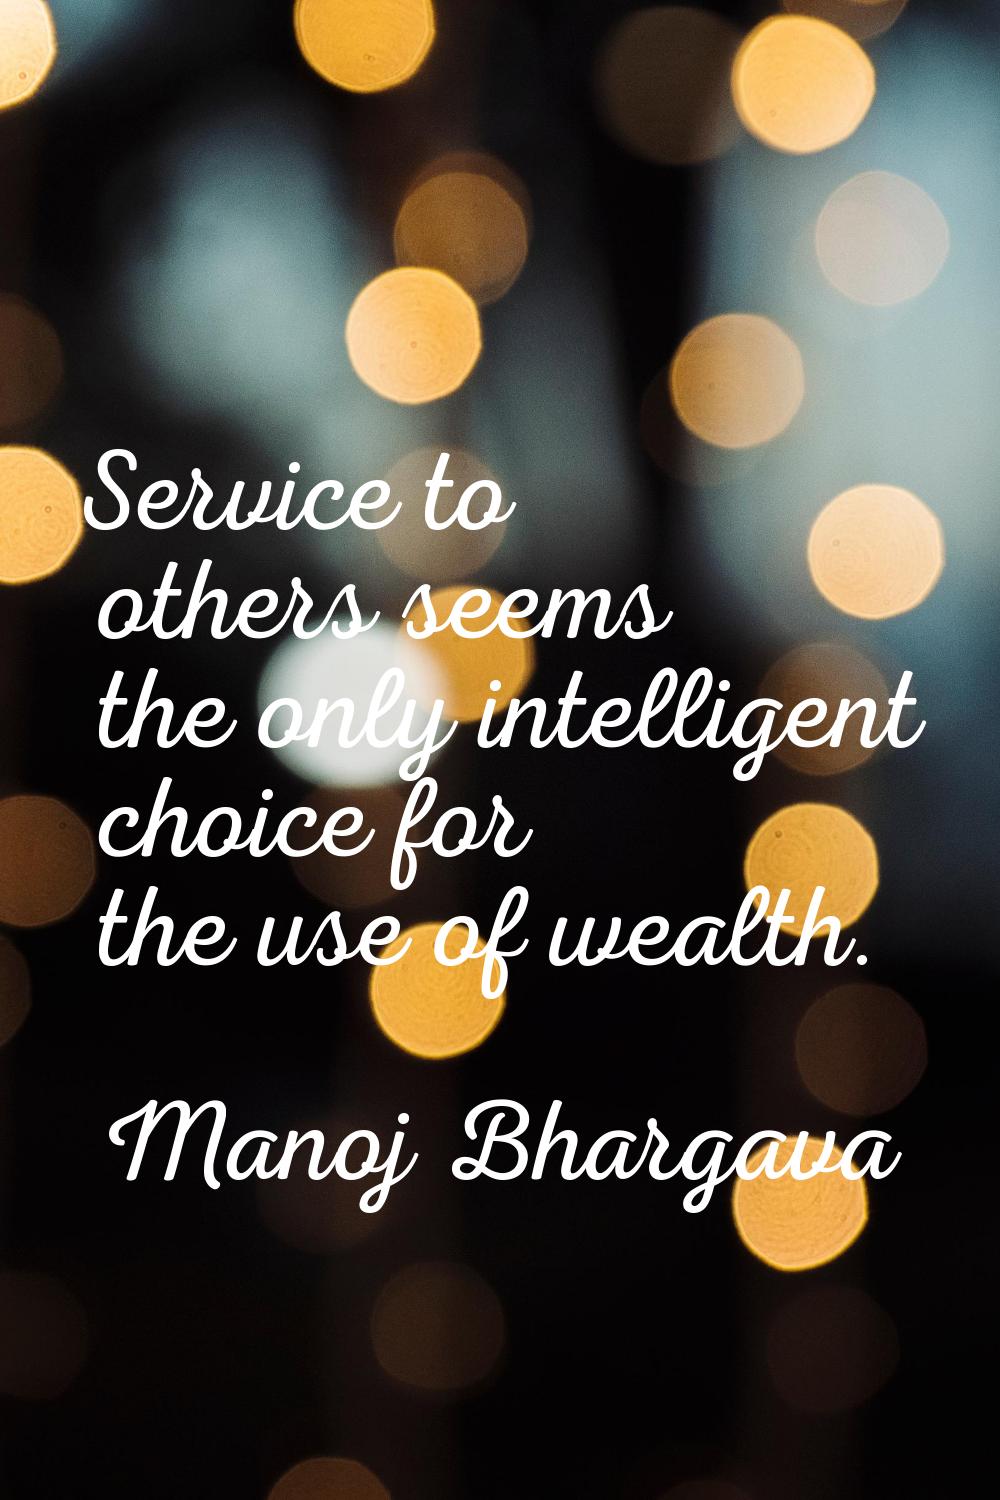 Service to others seems the only intelligent choice for the use of wealth.